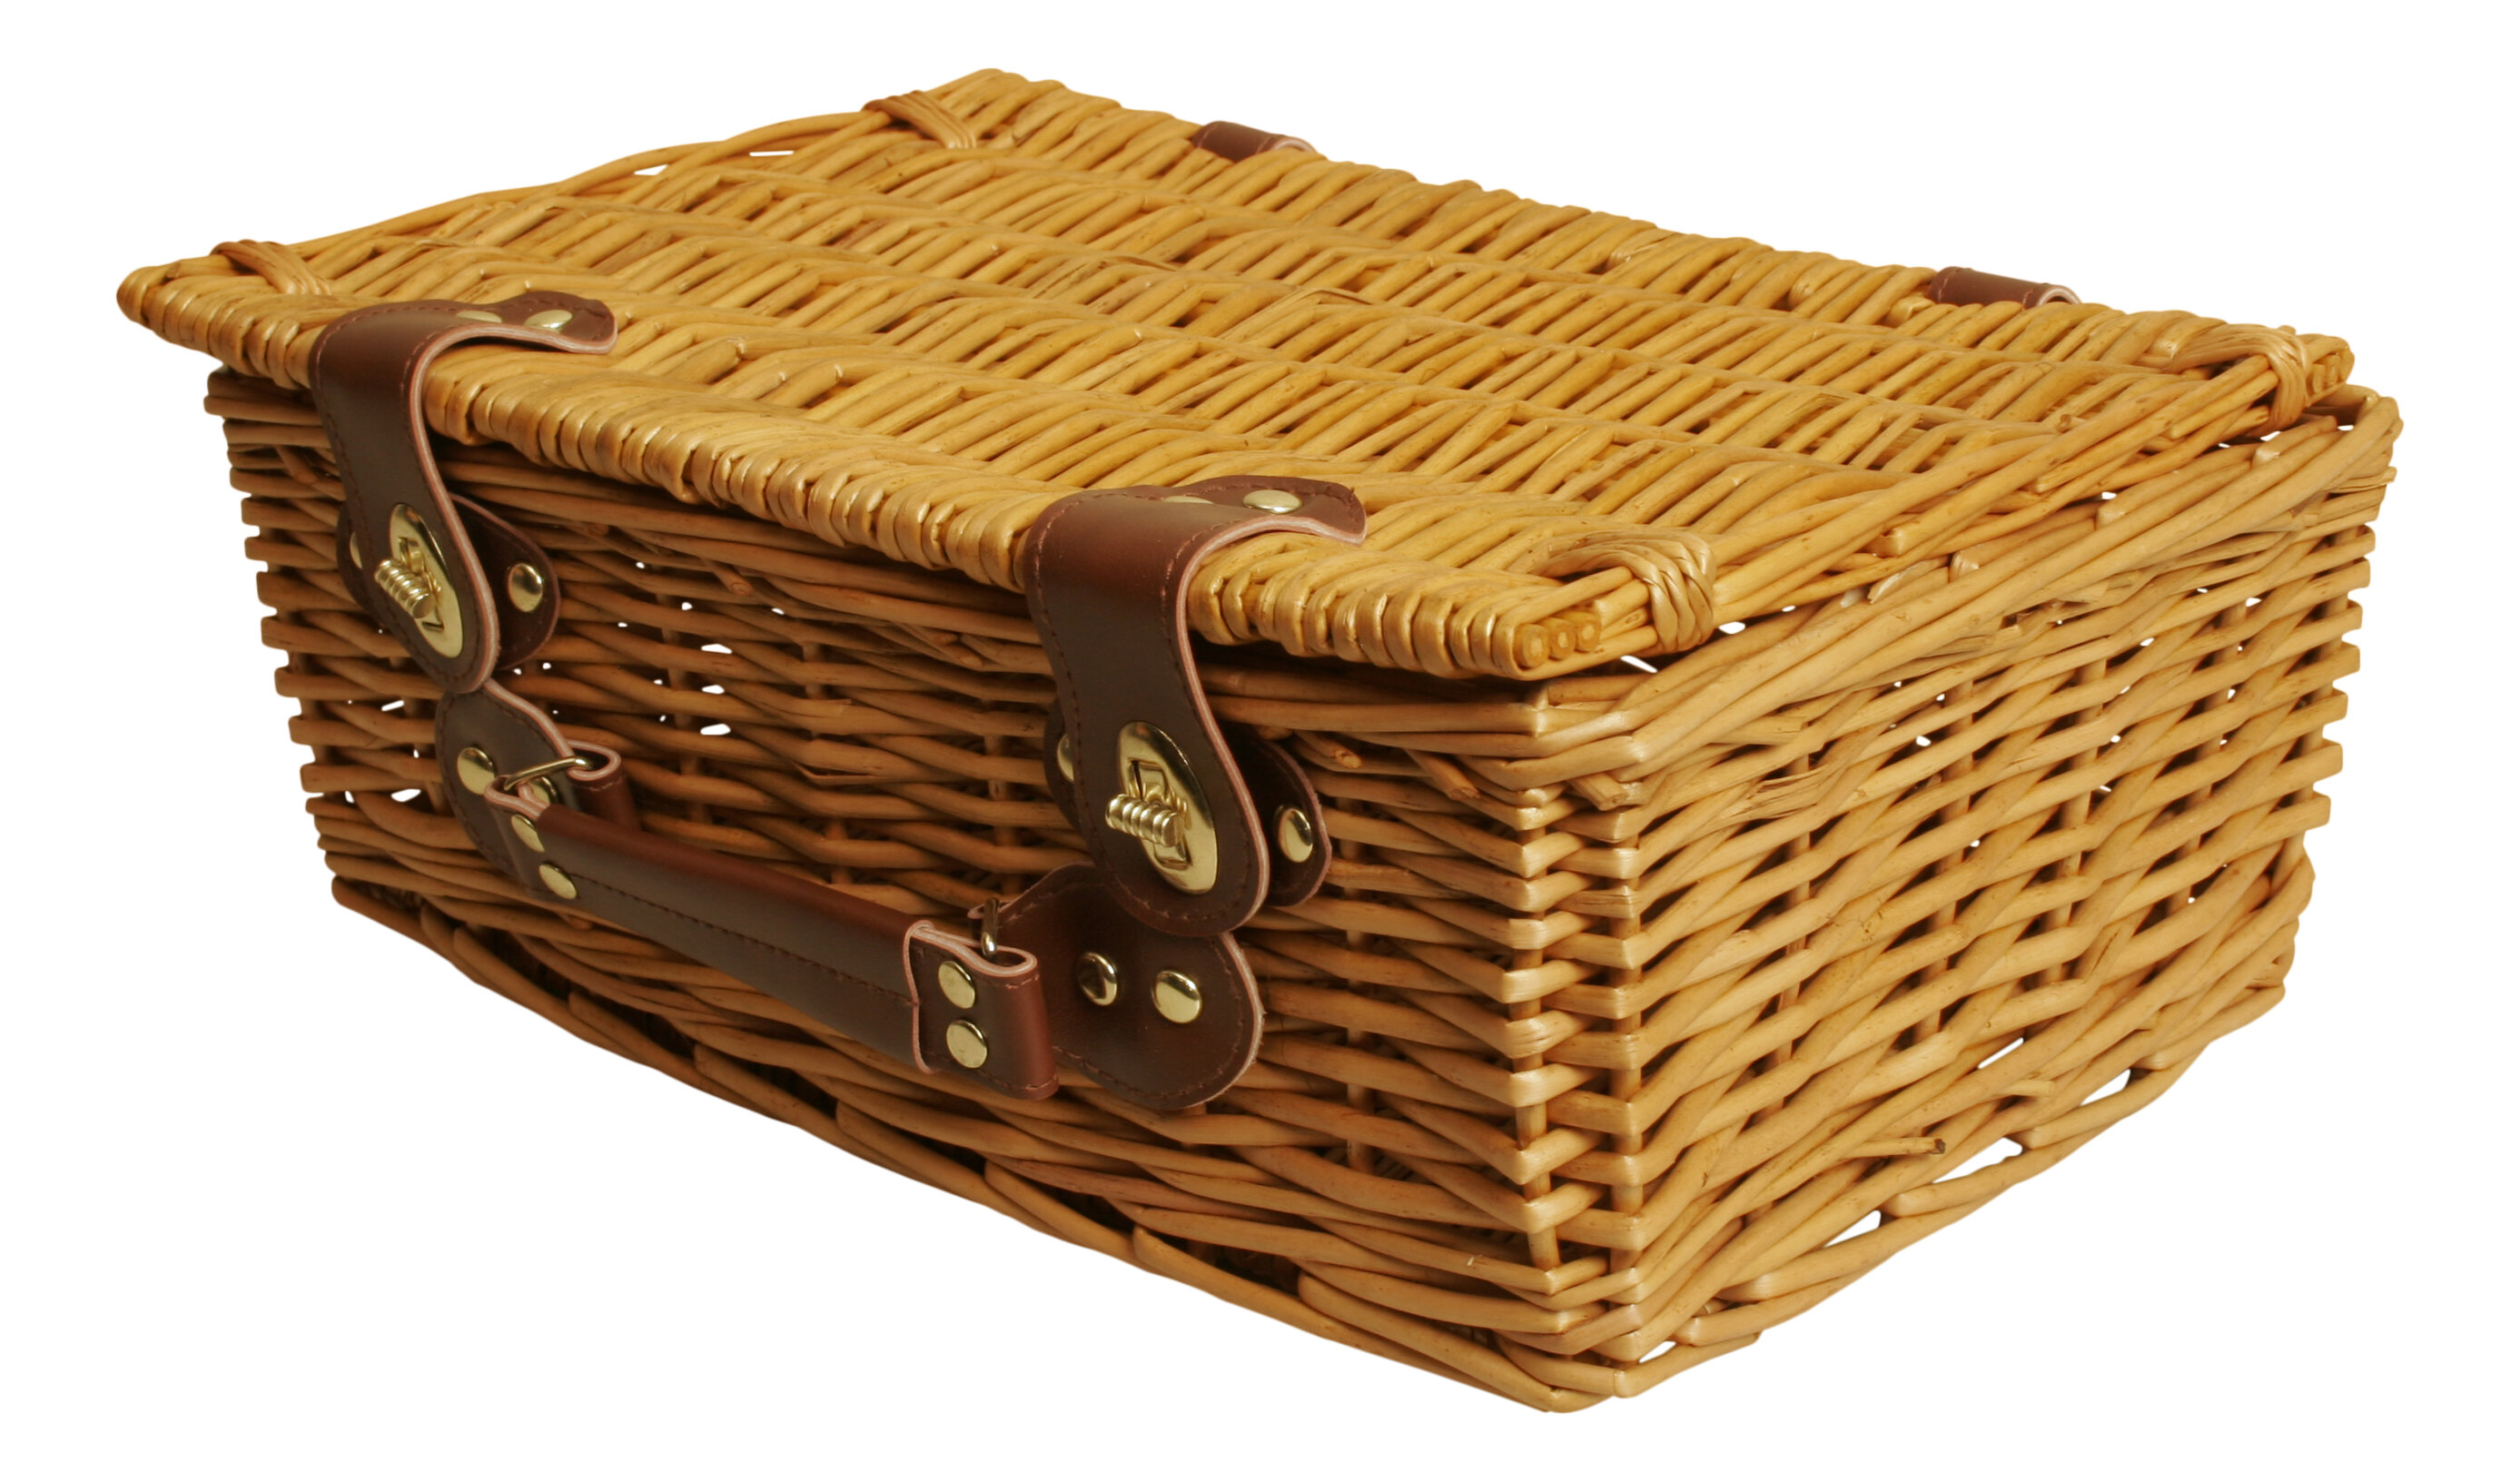 Willow Picnic Basket with single Handle